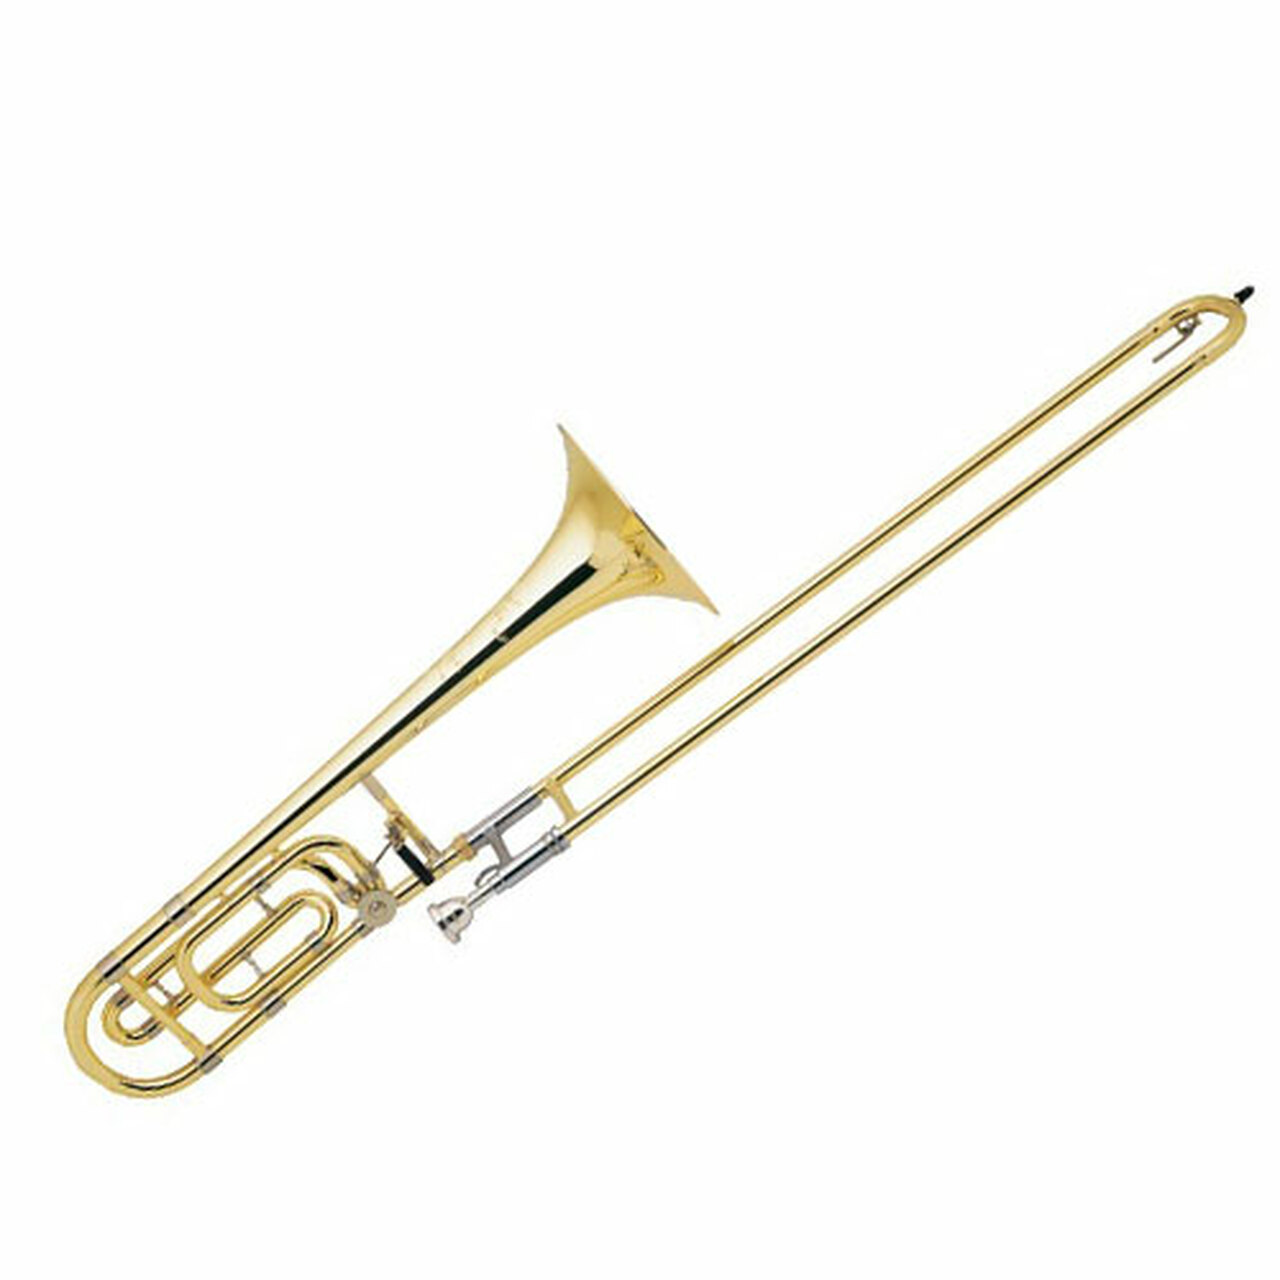 Detail Pictures Of A Trombone Nomer 28